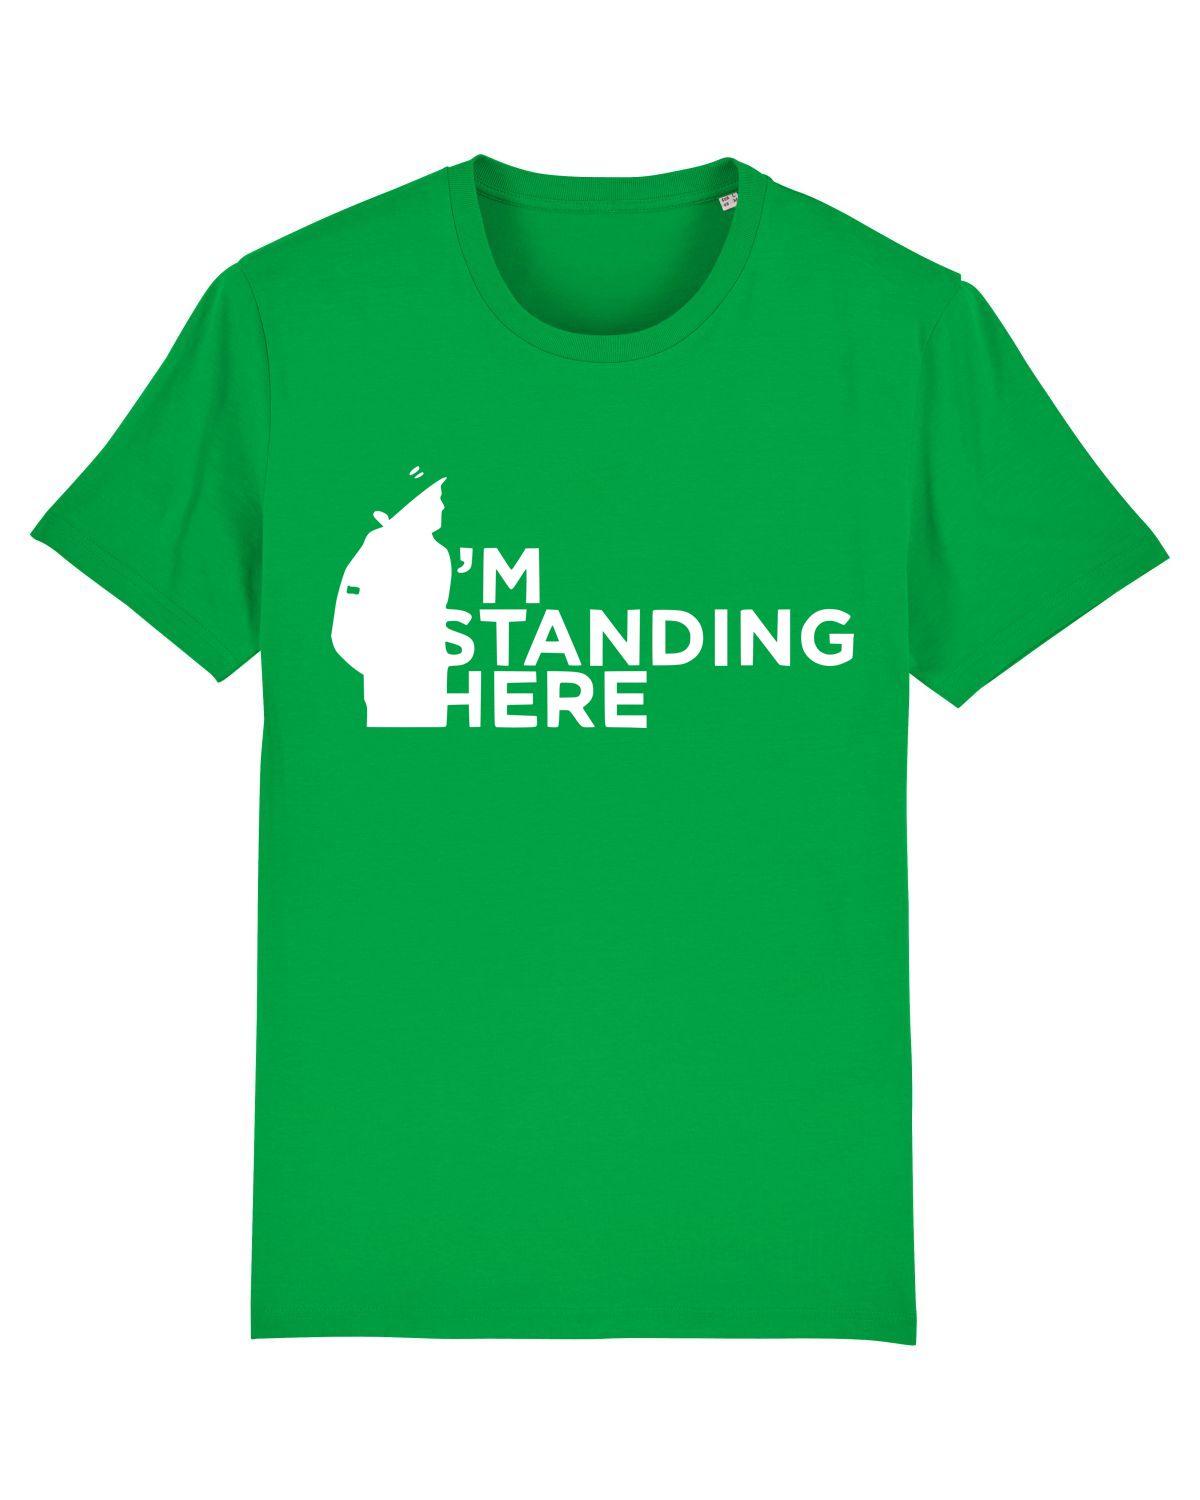 I'M STANDING HERE: T-Shirt in NUFC Colours Inspired by Terrace Culture (4 Colour Options) - SOUND IS COLOUR